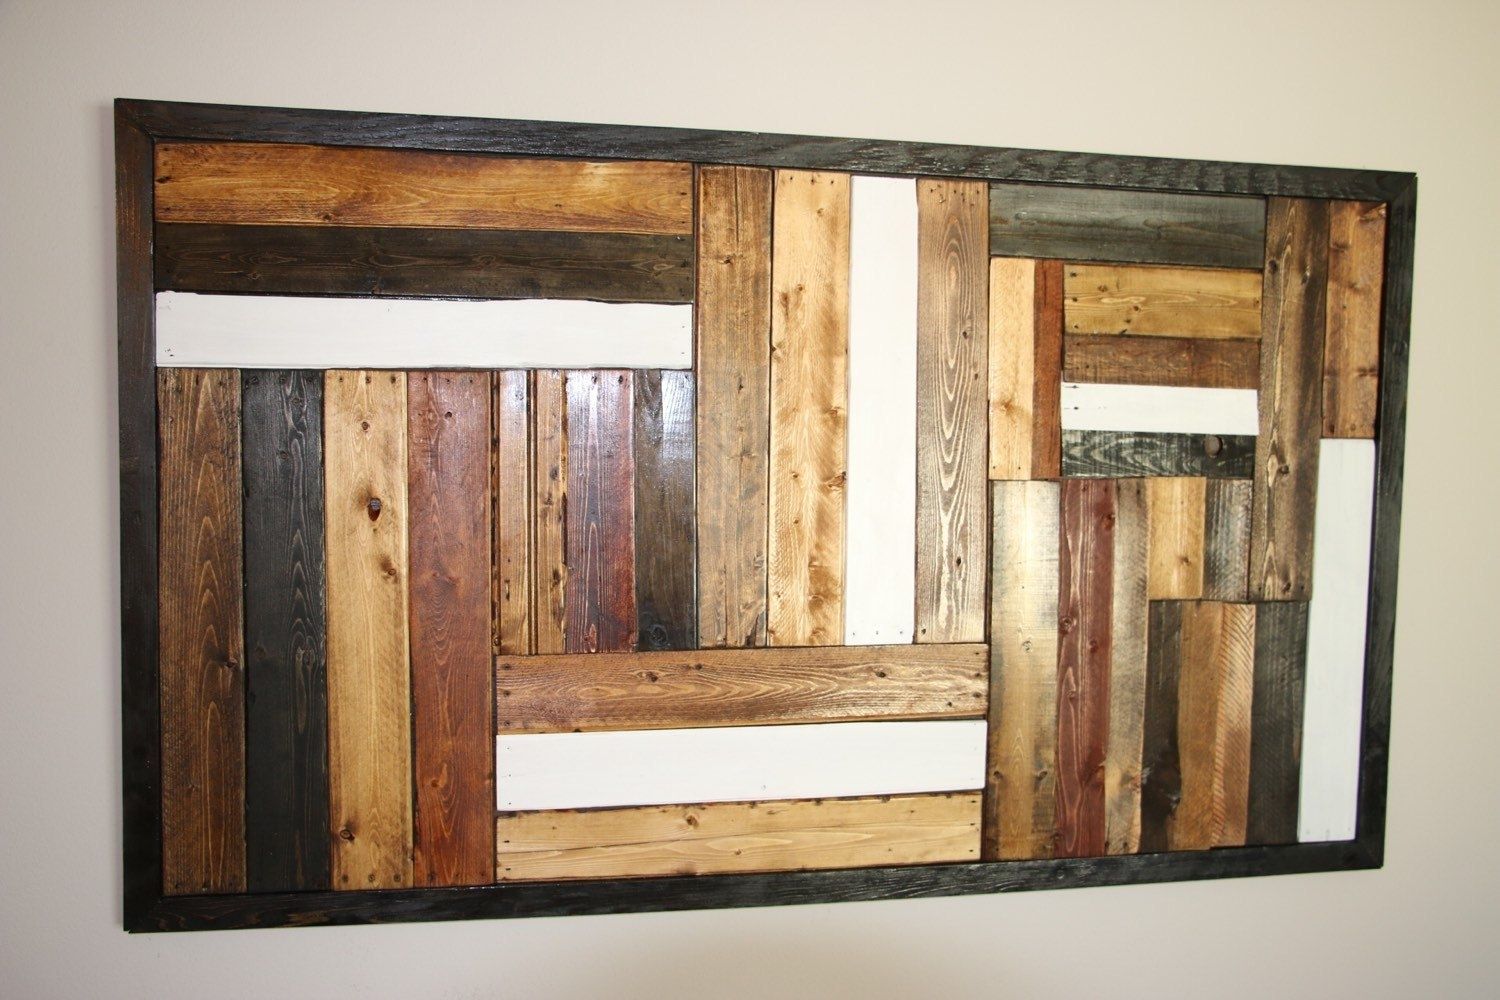 Recycled Pallet Wall Art Pallet Furniture Plans, Pallet Wall Art With Regard To Pallet Wall Art (Photo 8 of 20)